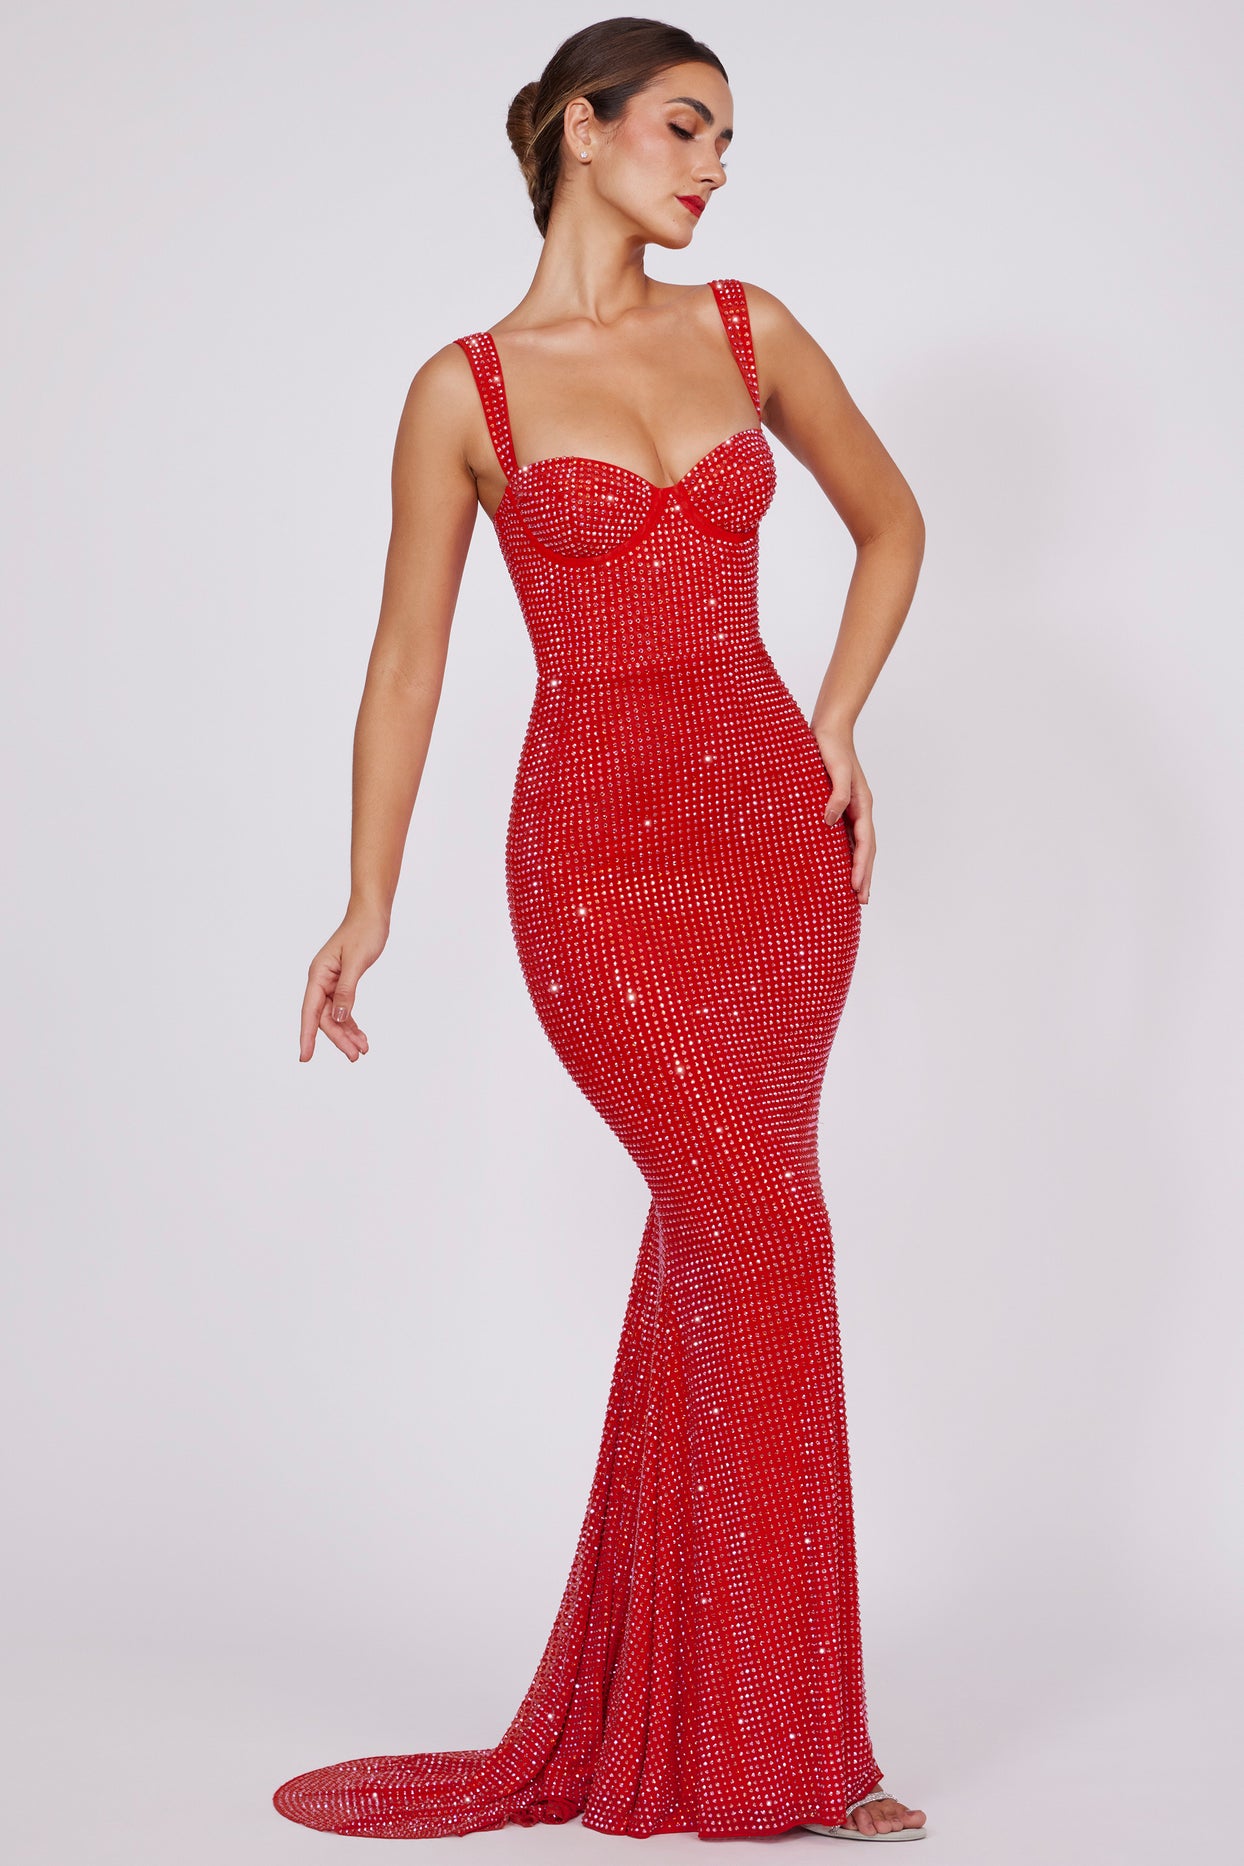 Idalia Embellished Corset Fishtail Evening Gown in Fire Red | Oh Polly